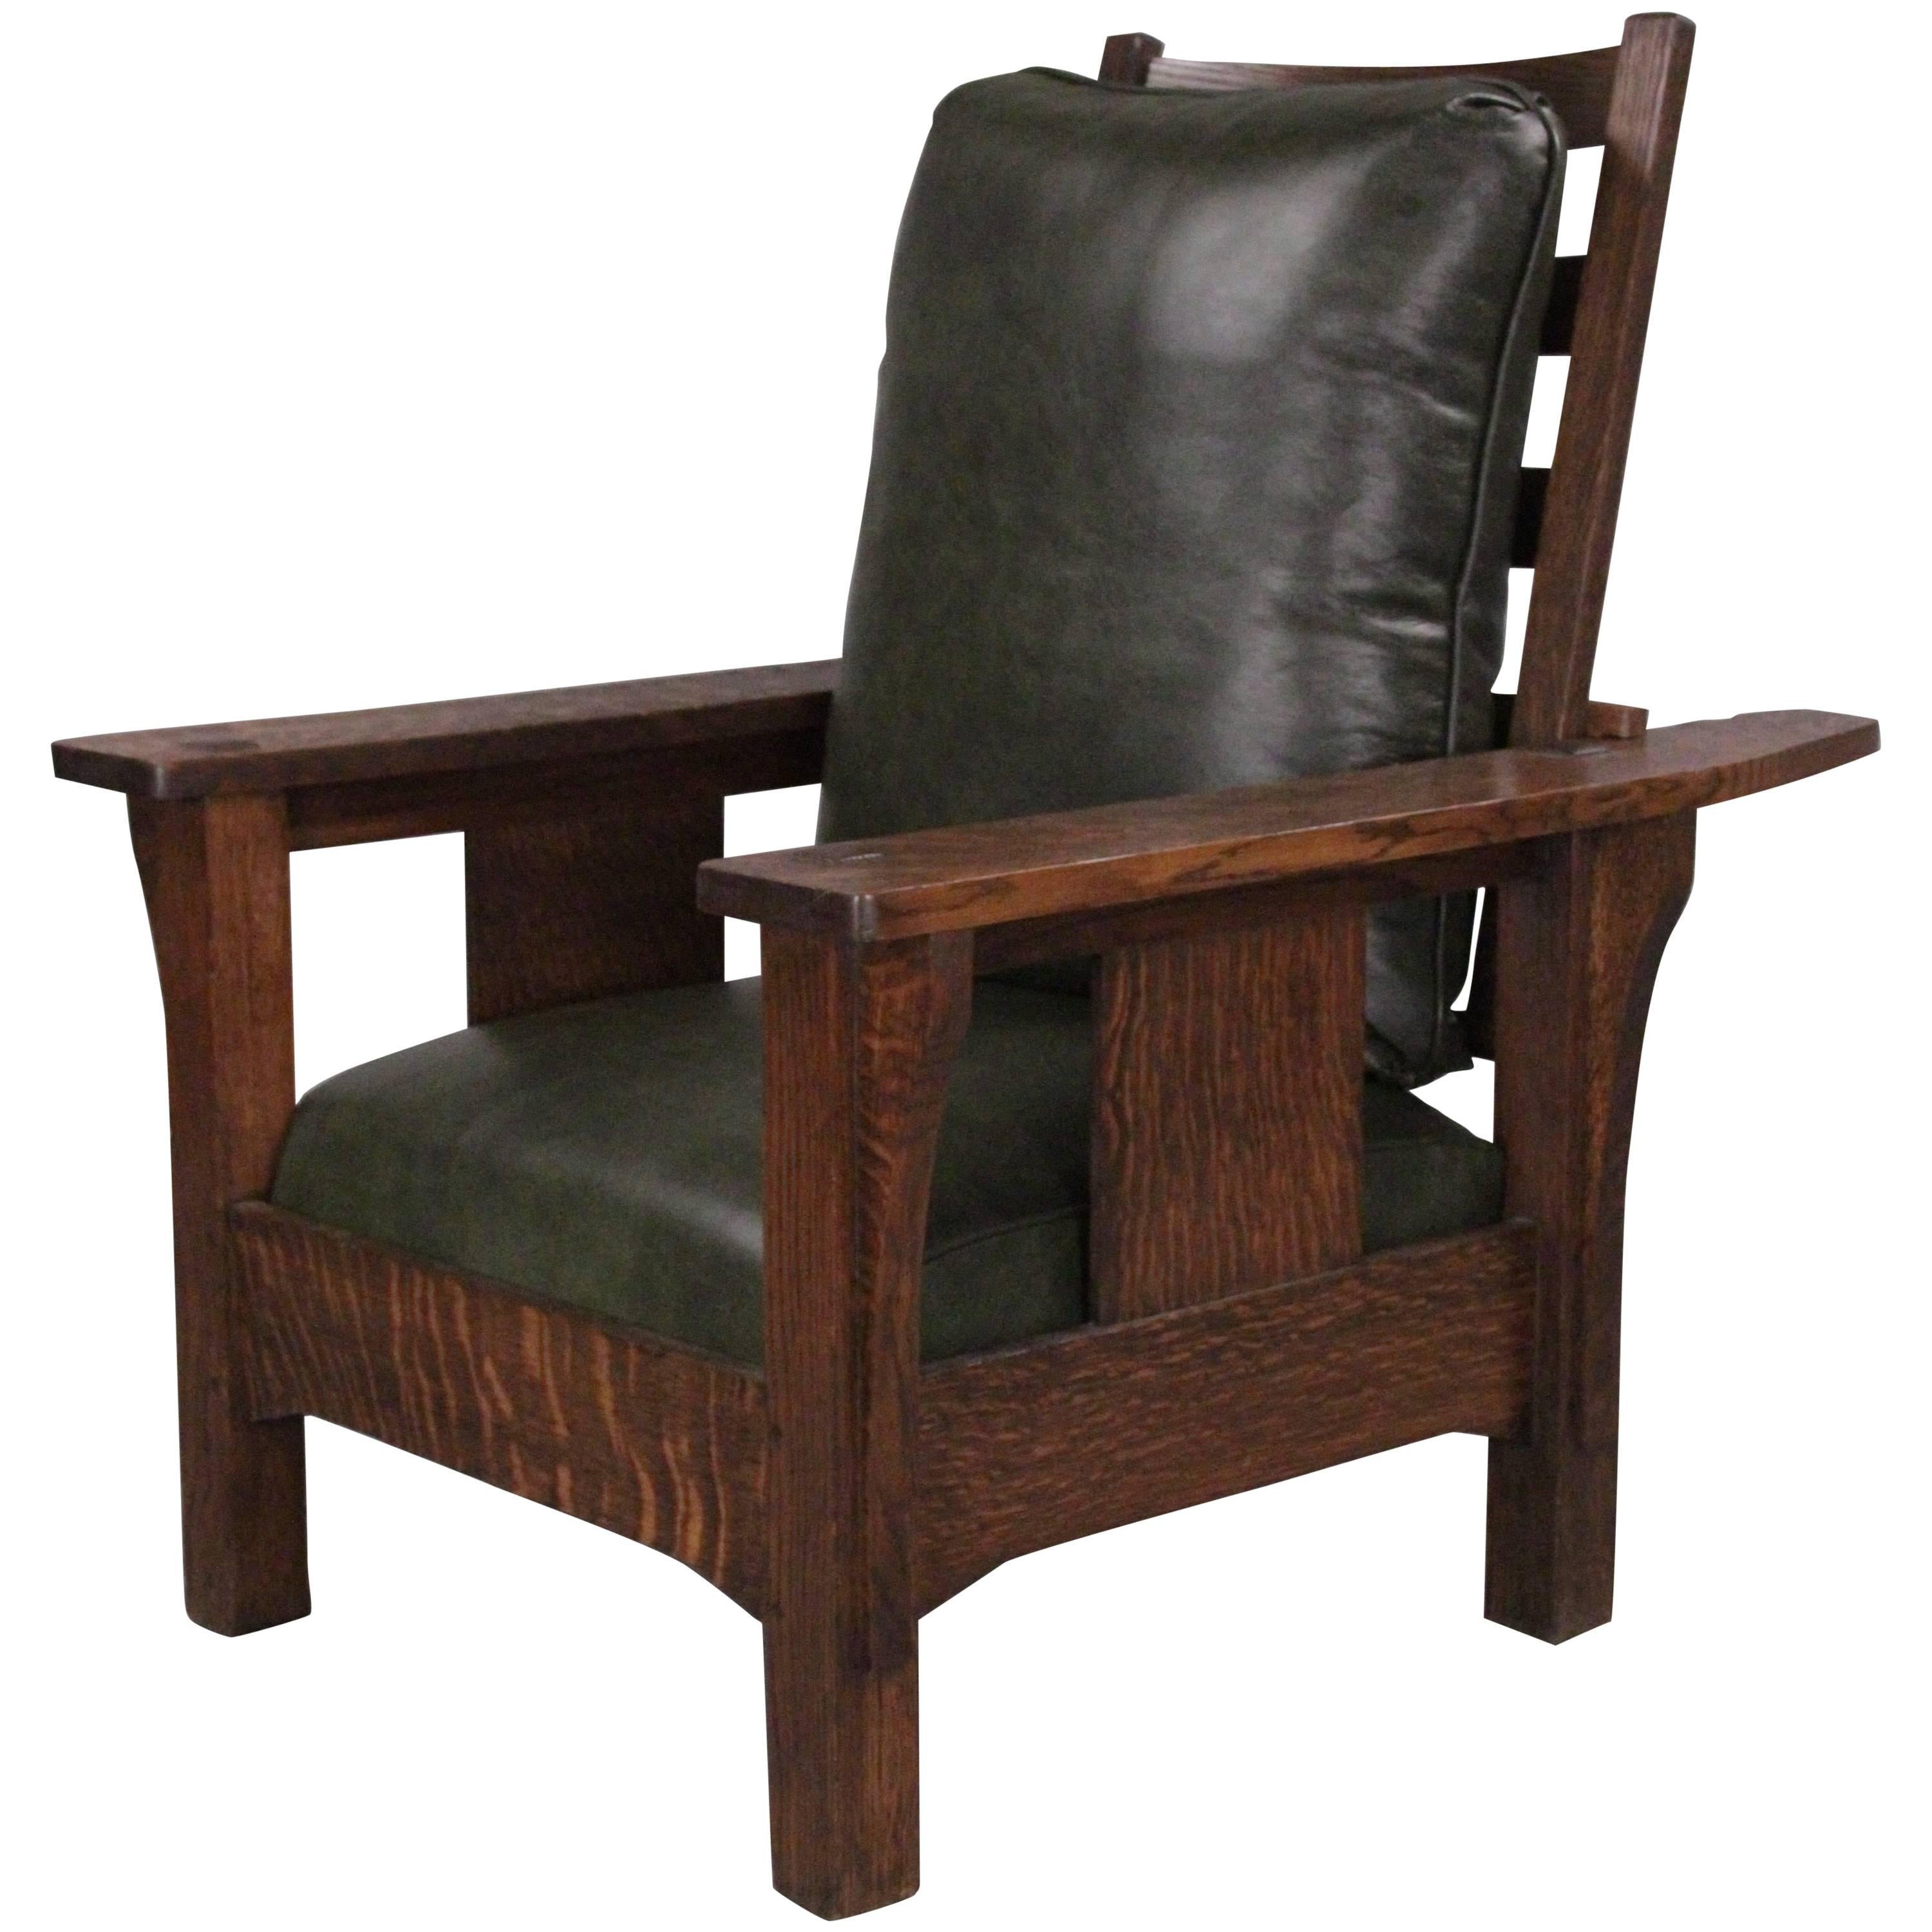 Large-Scale Arts and Crafts Morris Chair, circa 1910